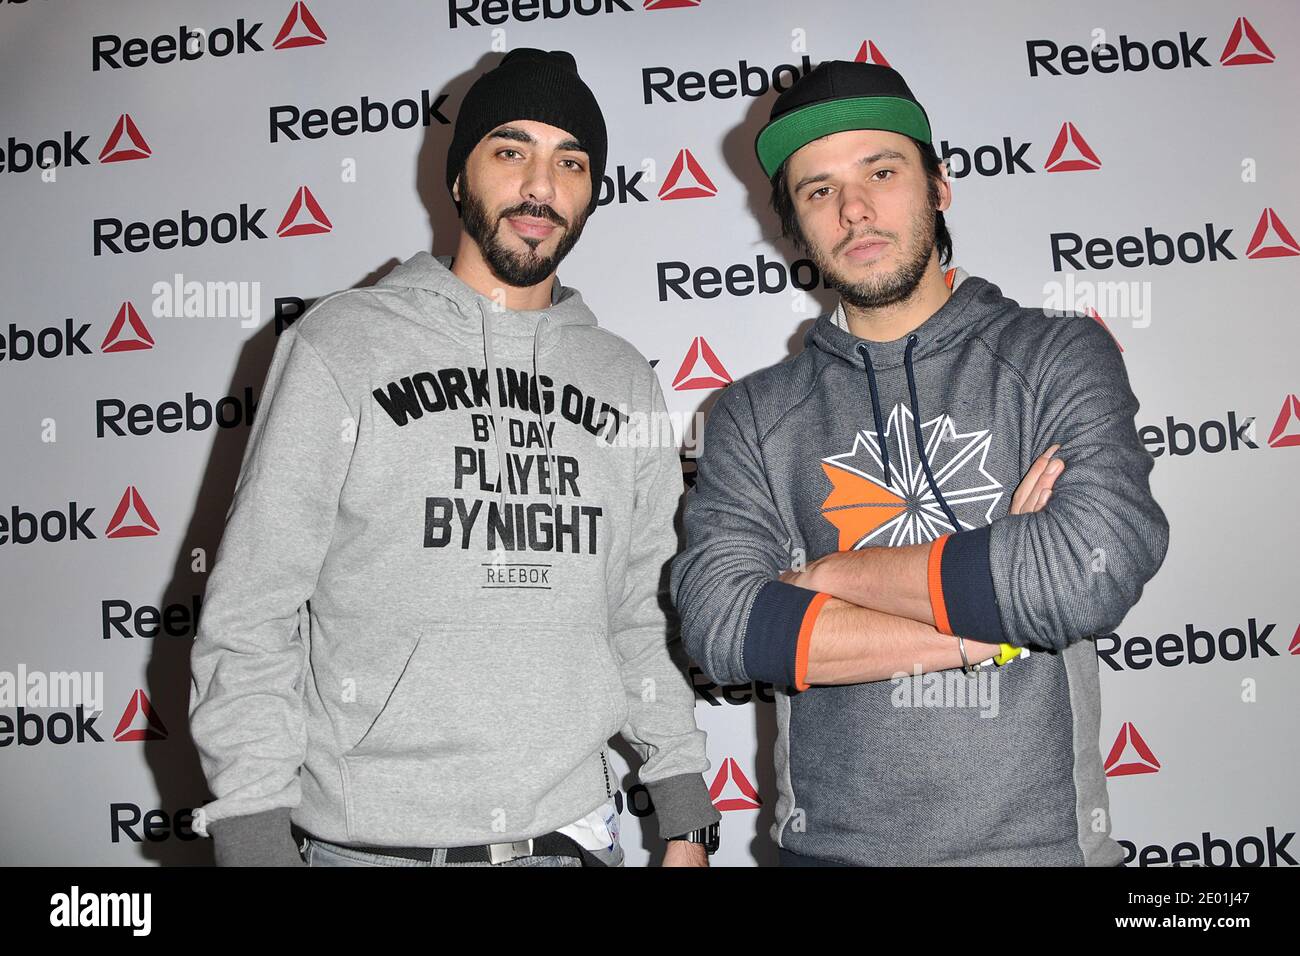 Orelsan attending the Reebok Concept Store Opening event at Avenue de L' Opera in Paris, France on December 4, 2013. Photo by Thierry  Plessis/ABACAPRESS.COM Stock Photo - Alamy